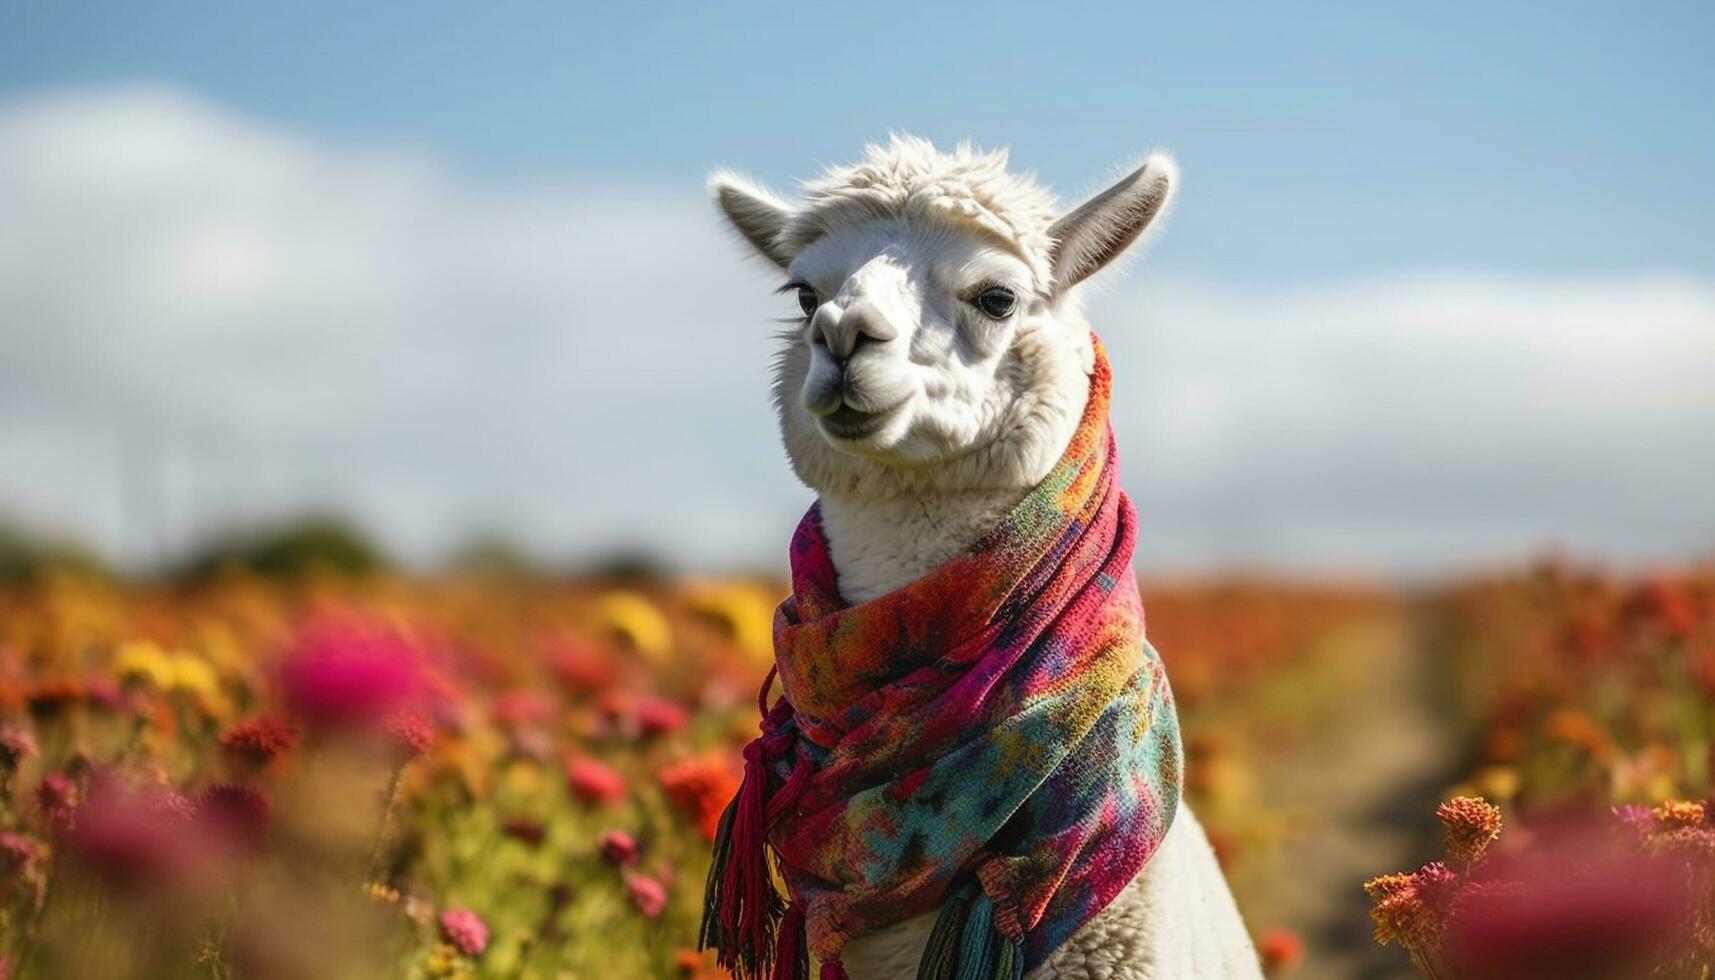 Cute alpaca in rural scene, looking at camera, surrounded by grass generated by AI photo